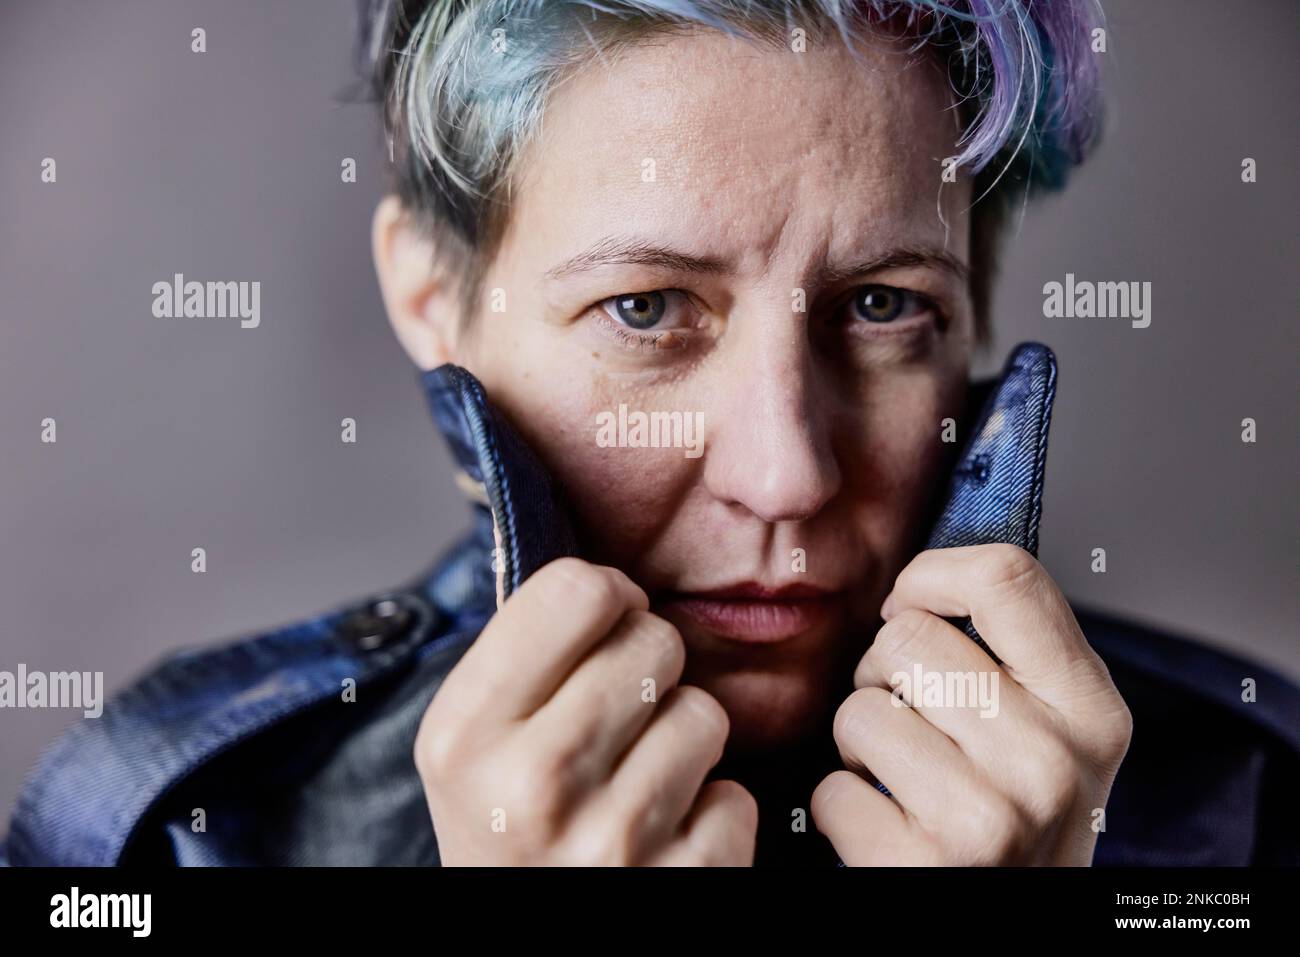 Androgynous woman with dyed hair pulls up the collar of her denim jacket, portrait Stock Photo